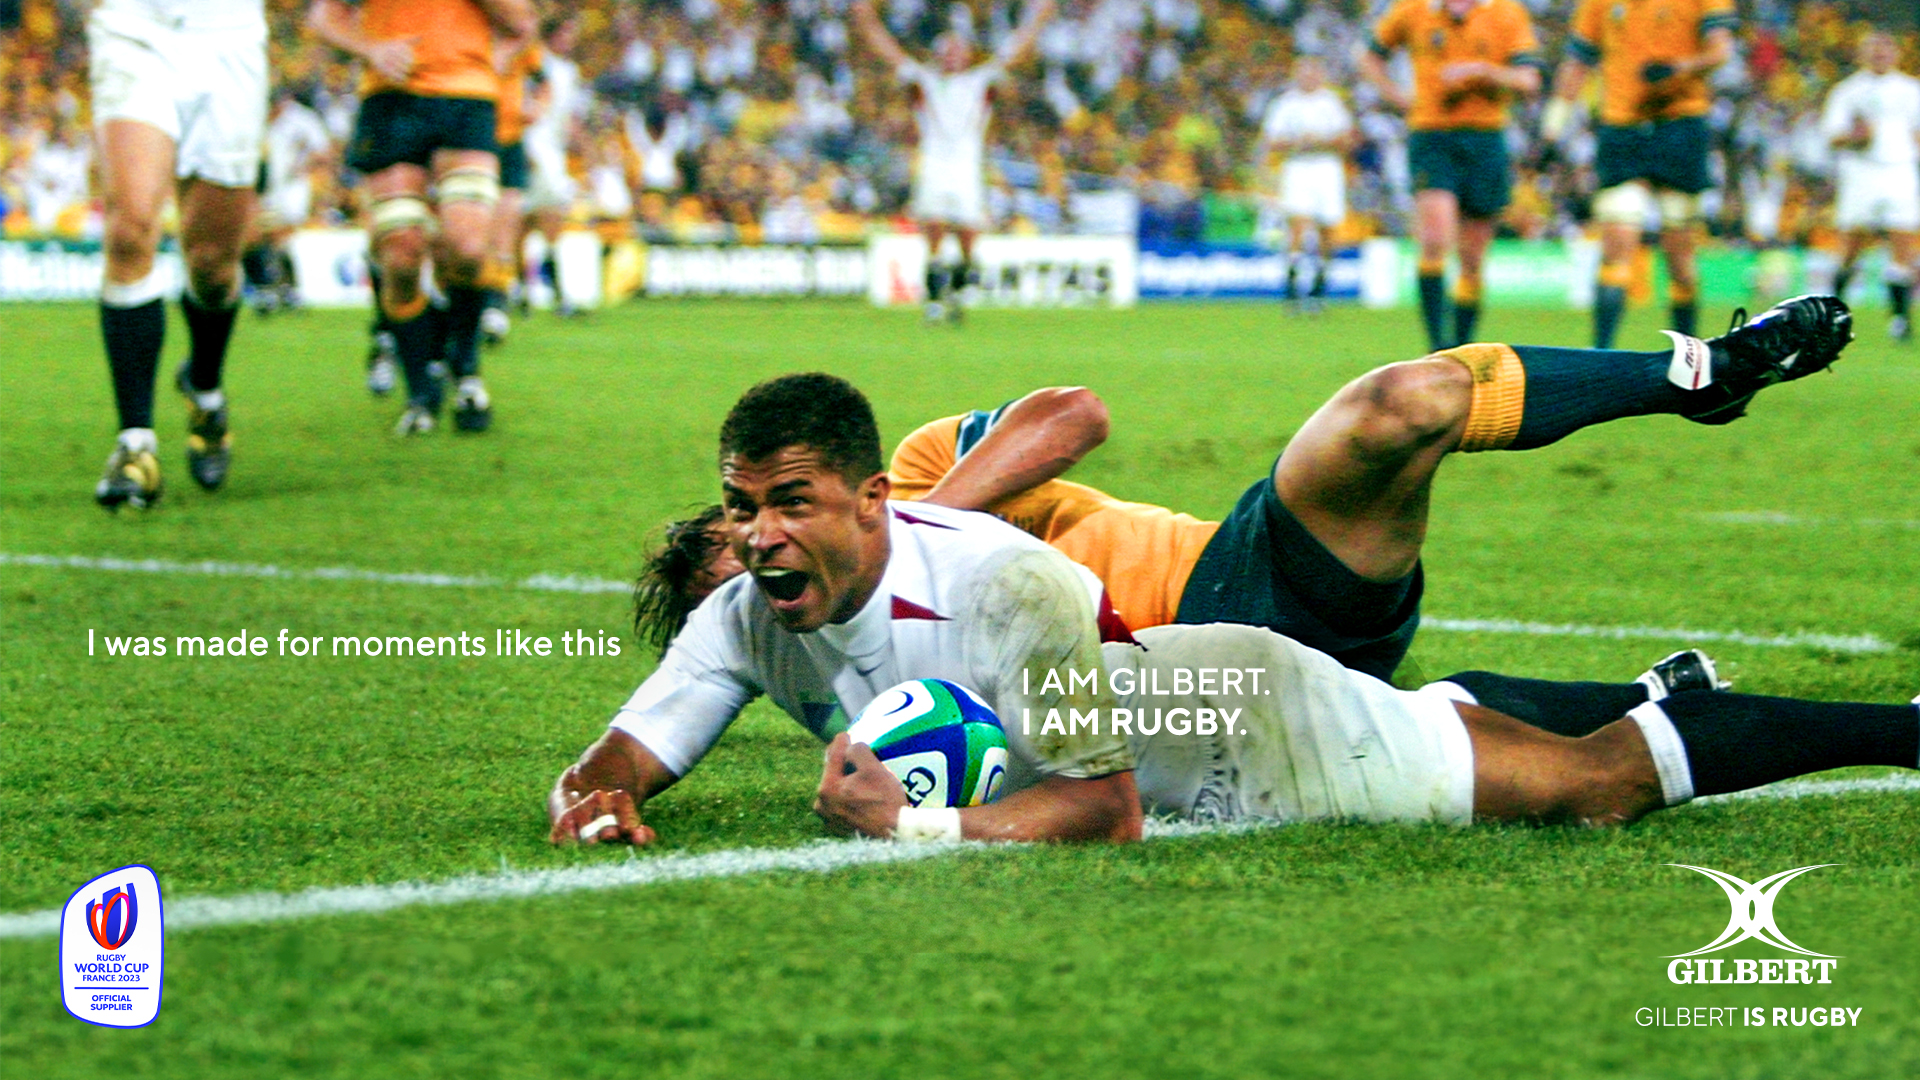 Jason Robinson scoring a try in the 2003 Rugby World Cup Final holding a Gilbert rugby ball, with a headline that says: “I was made for moments like this. I am Gilbert. I am Rugby”